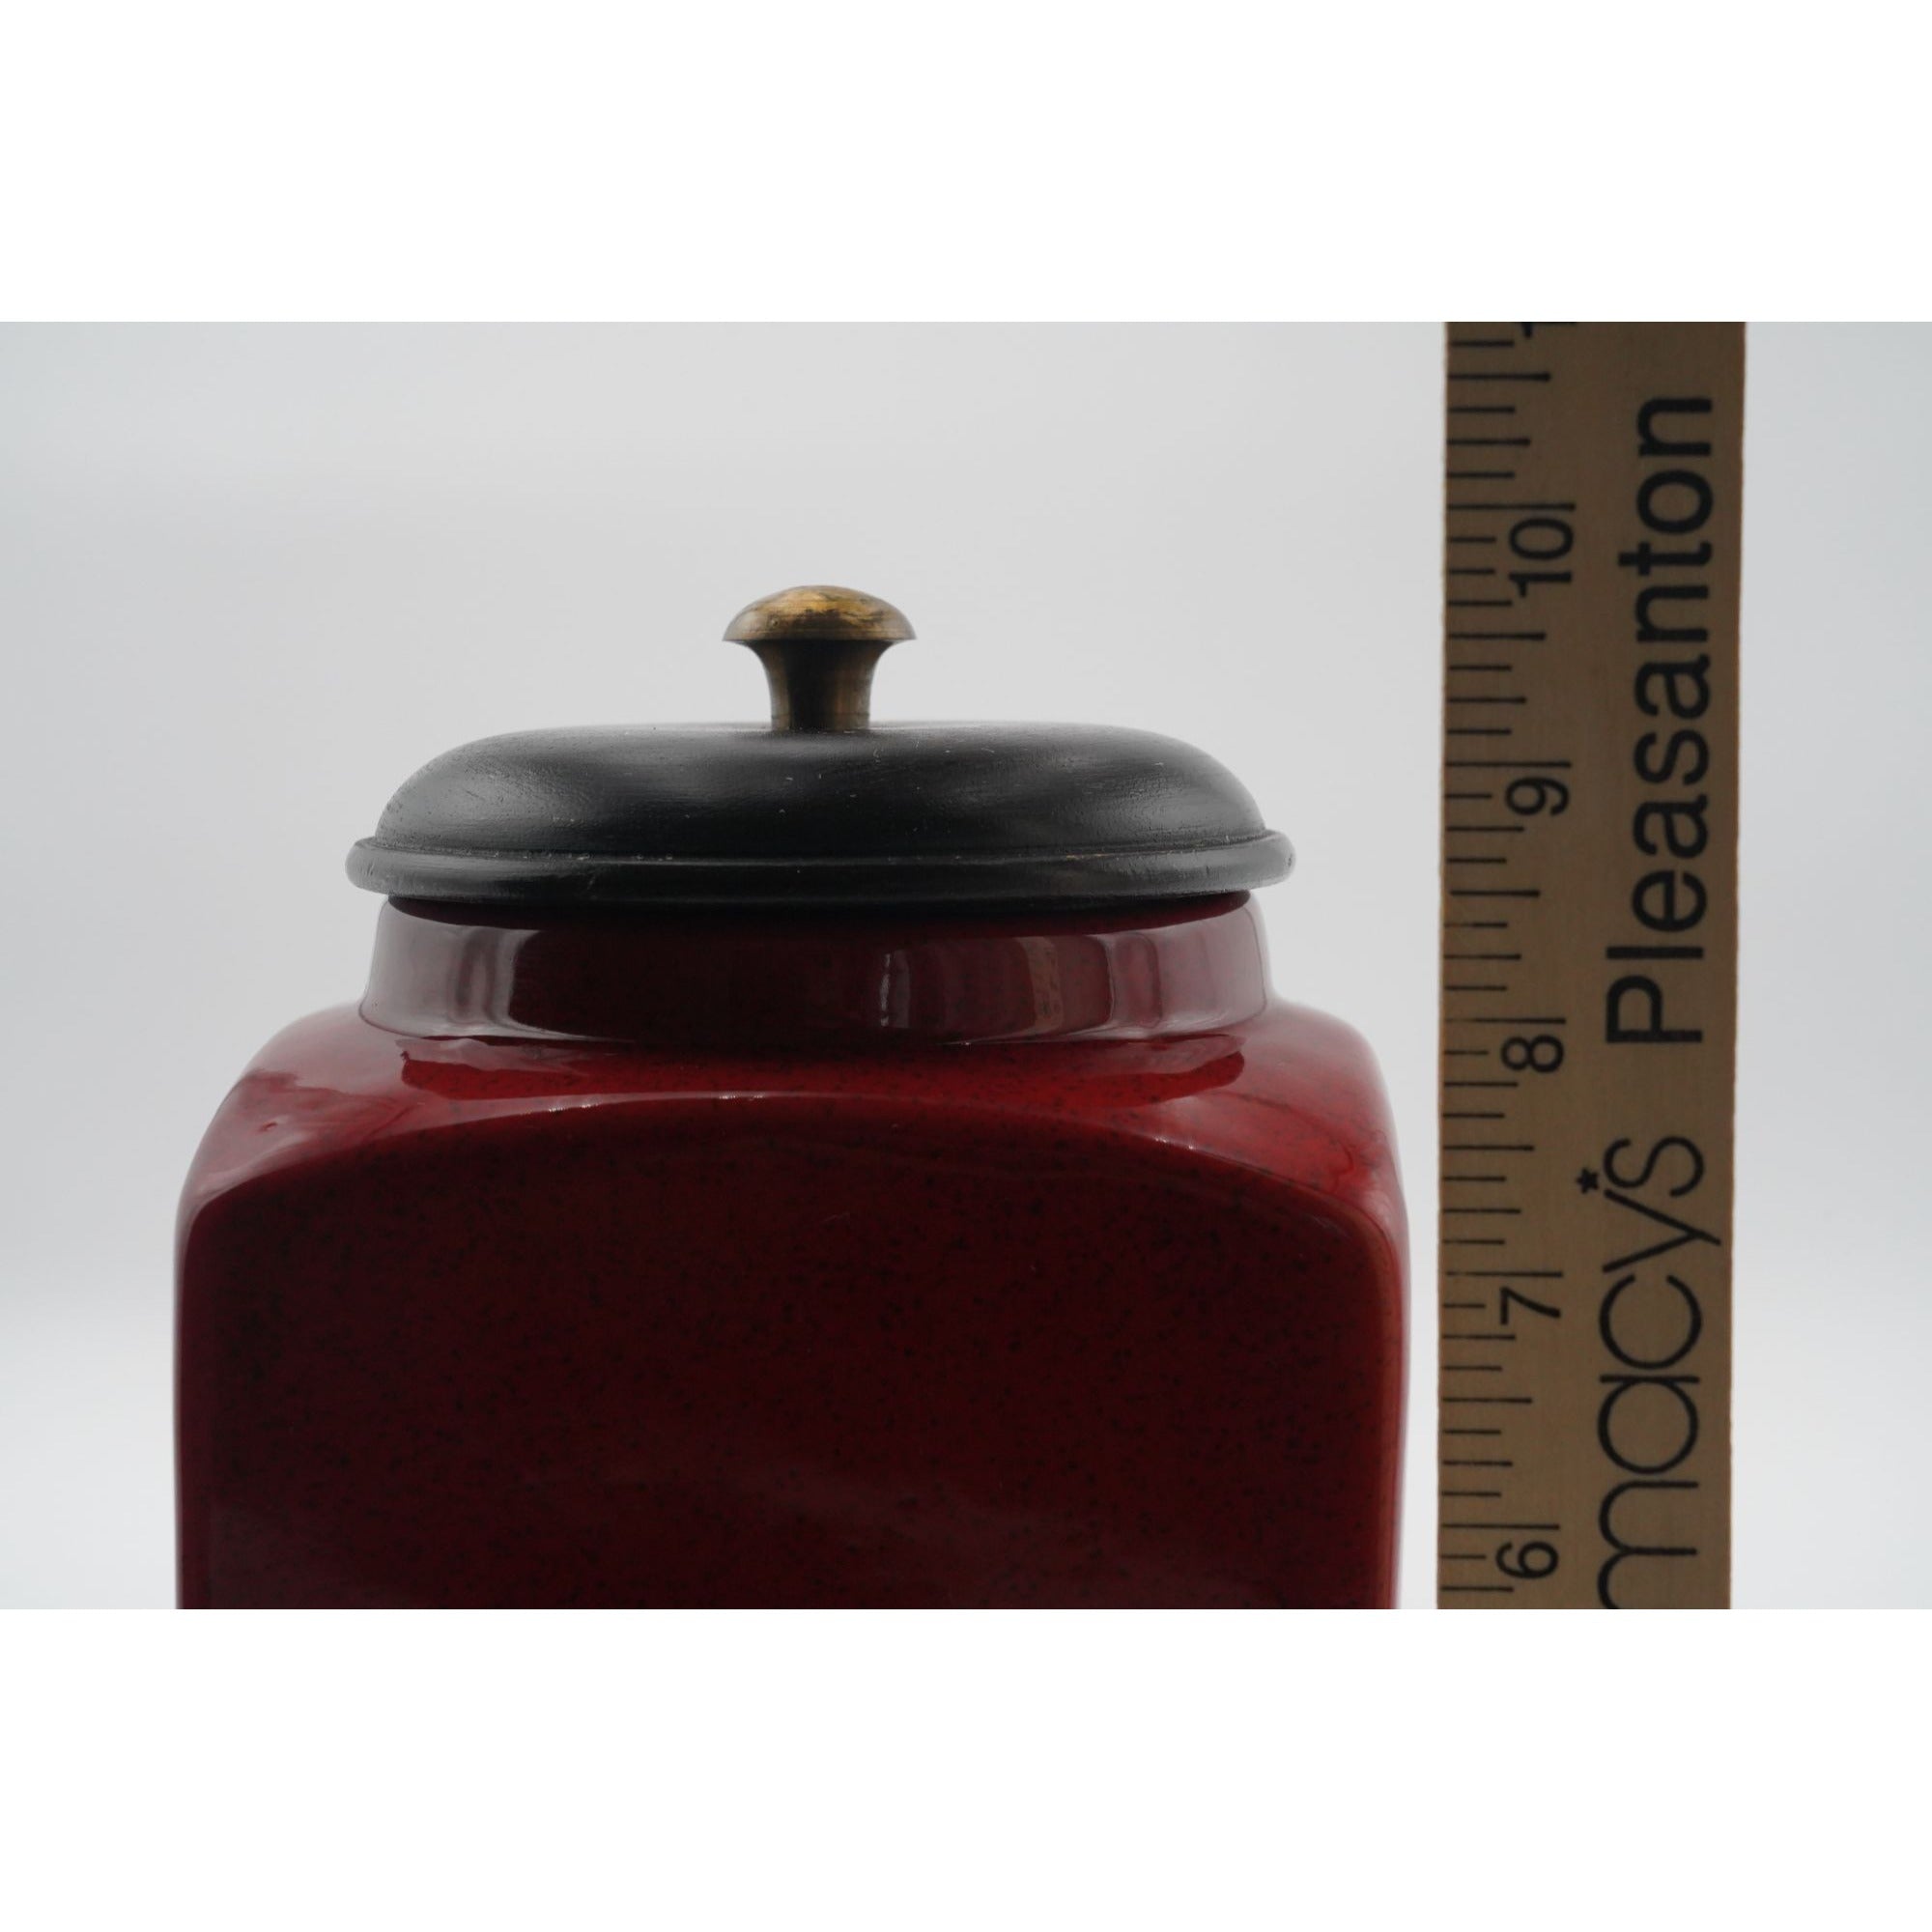 Pier 1 Imports Rustic Brick Red Ceramic Canister with Lid Square 9.75" x 5" x 5"